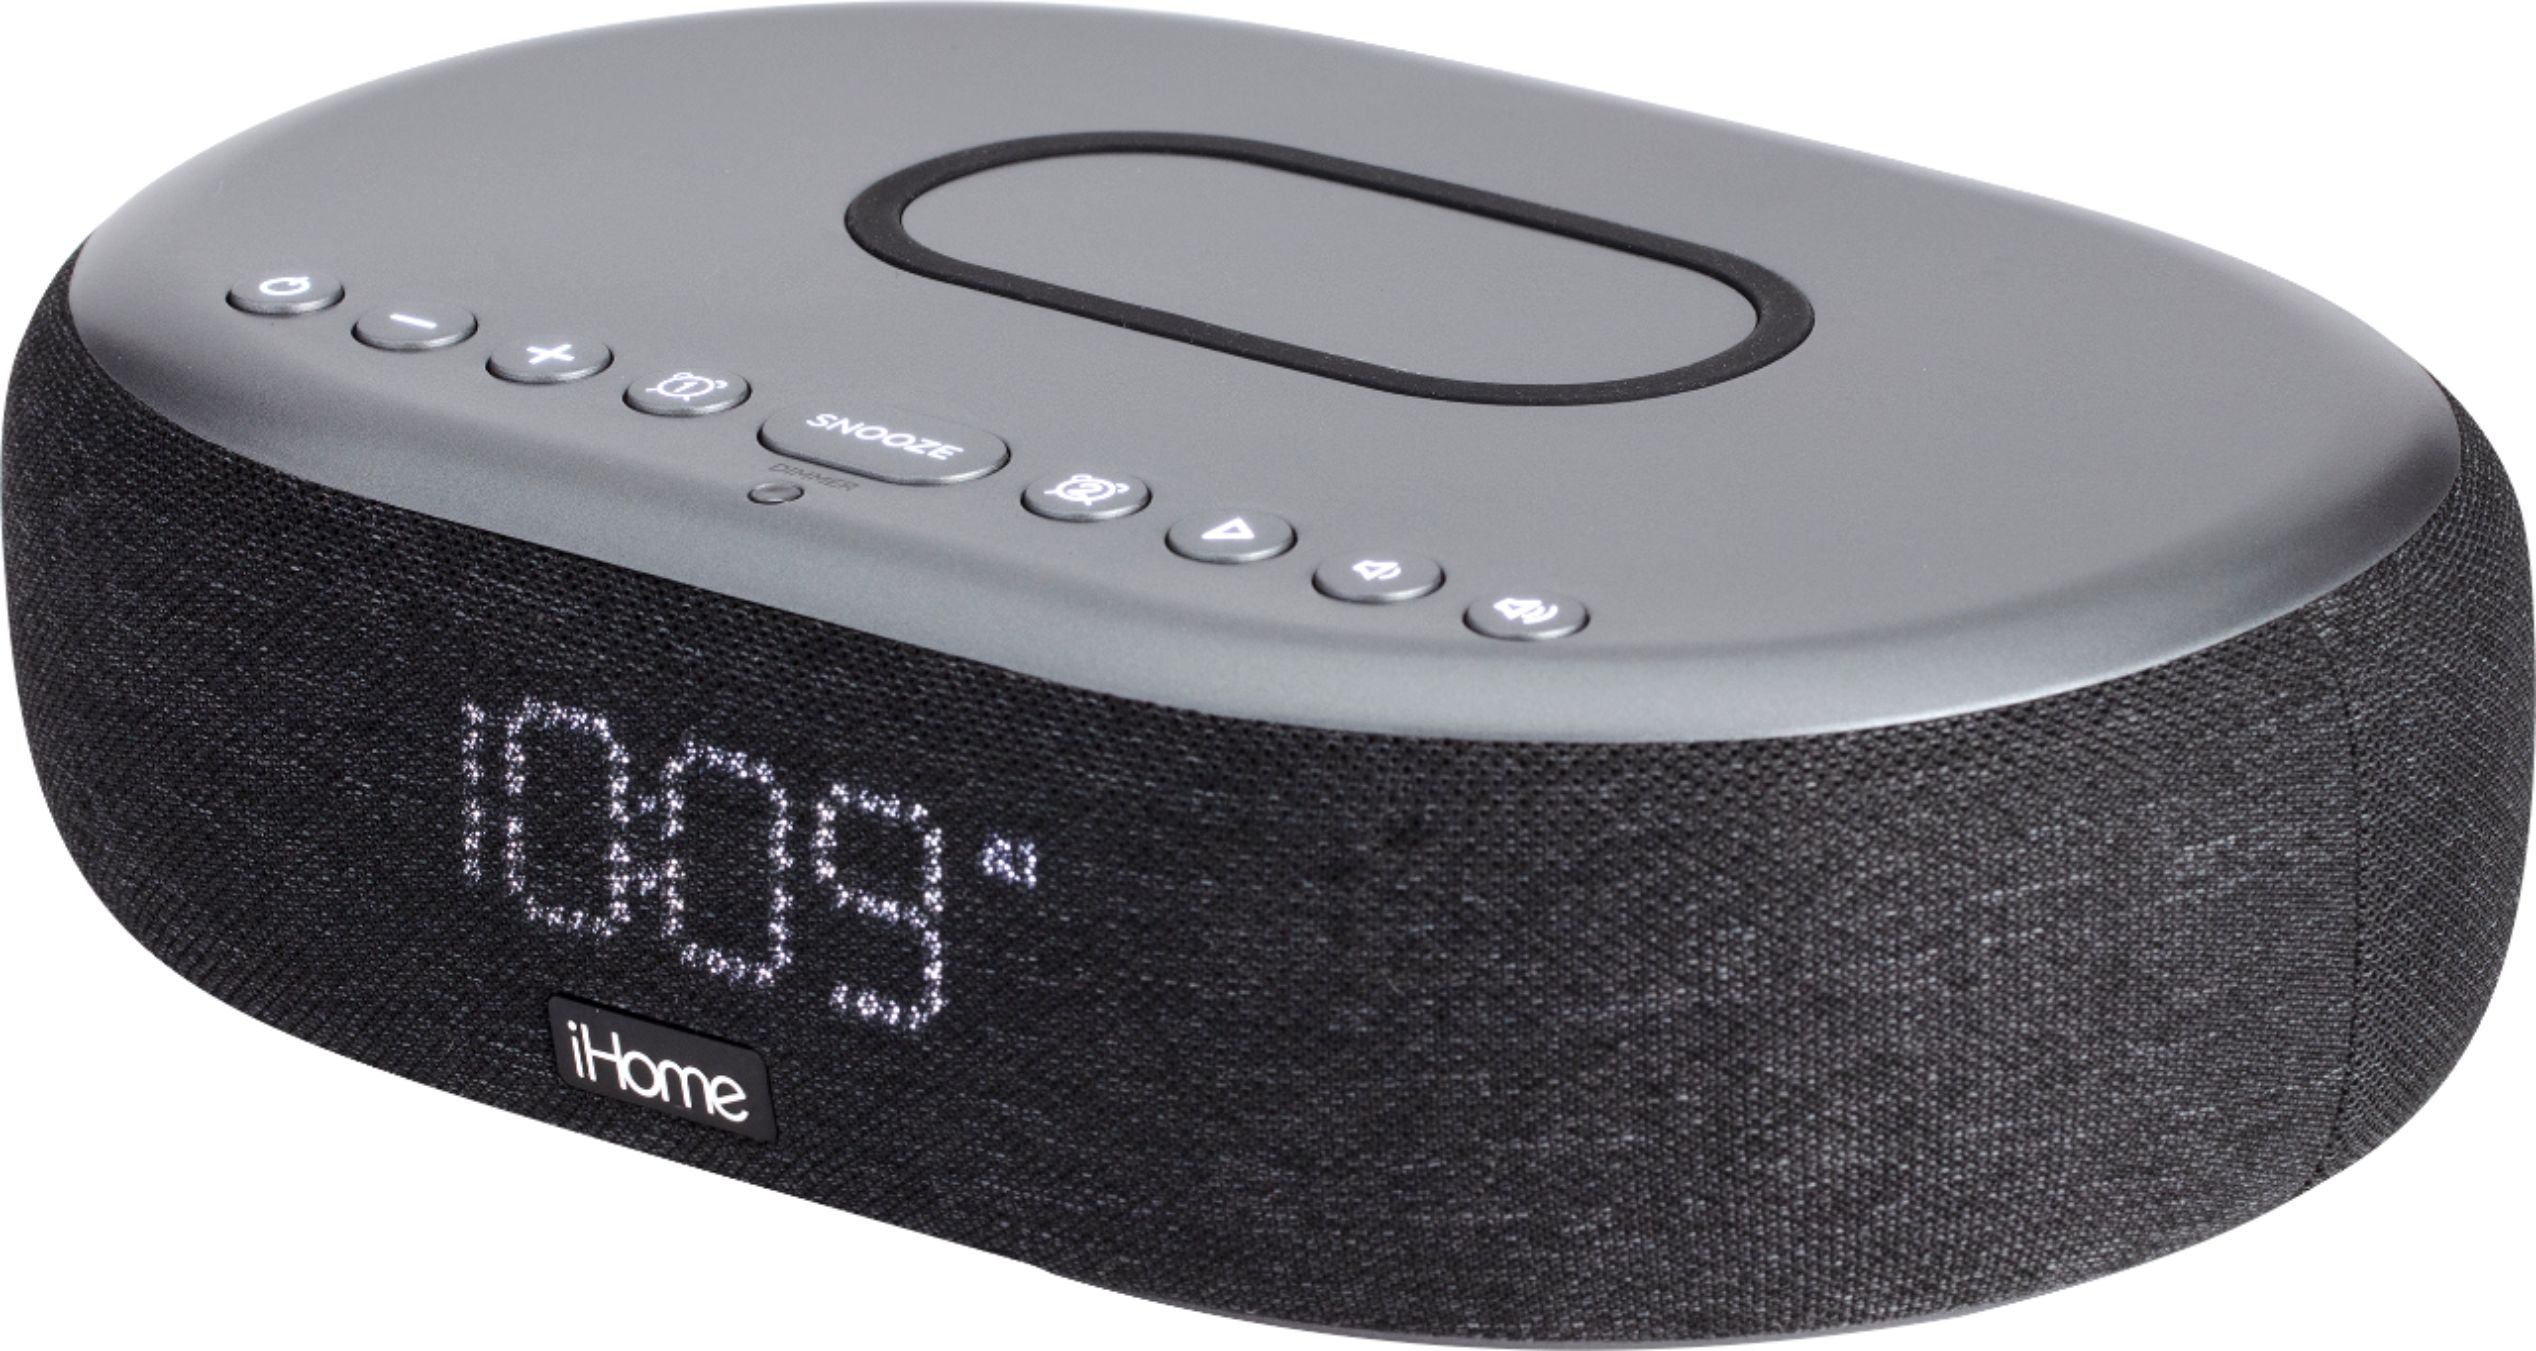 Angle View: iHome - TimeBoost - Bluetooth Stereo Alarm Clock with Speakerphone, Wireless Charging and USB Charging - Black/Gunmetal